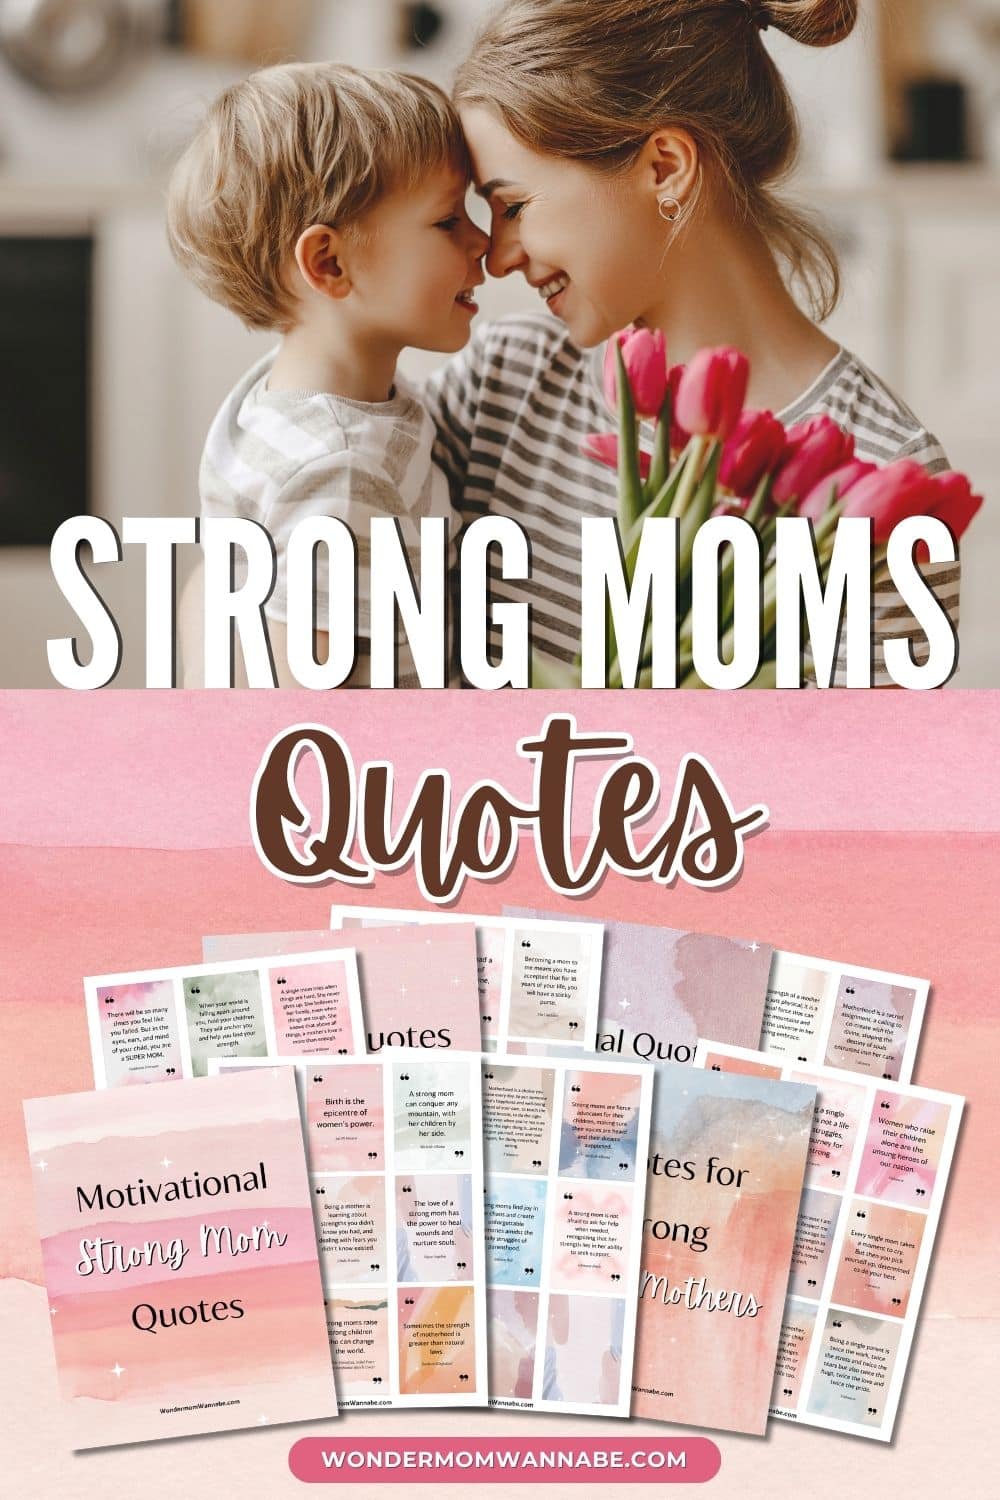 Looking for some inspiration and motivation? Check out these empowering strong moms quotes that will uplift your spirits and remind you of the incredible strength that mothers possess.